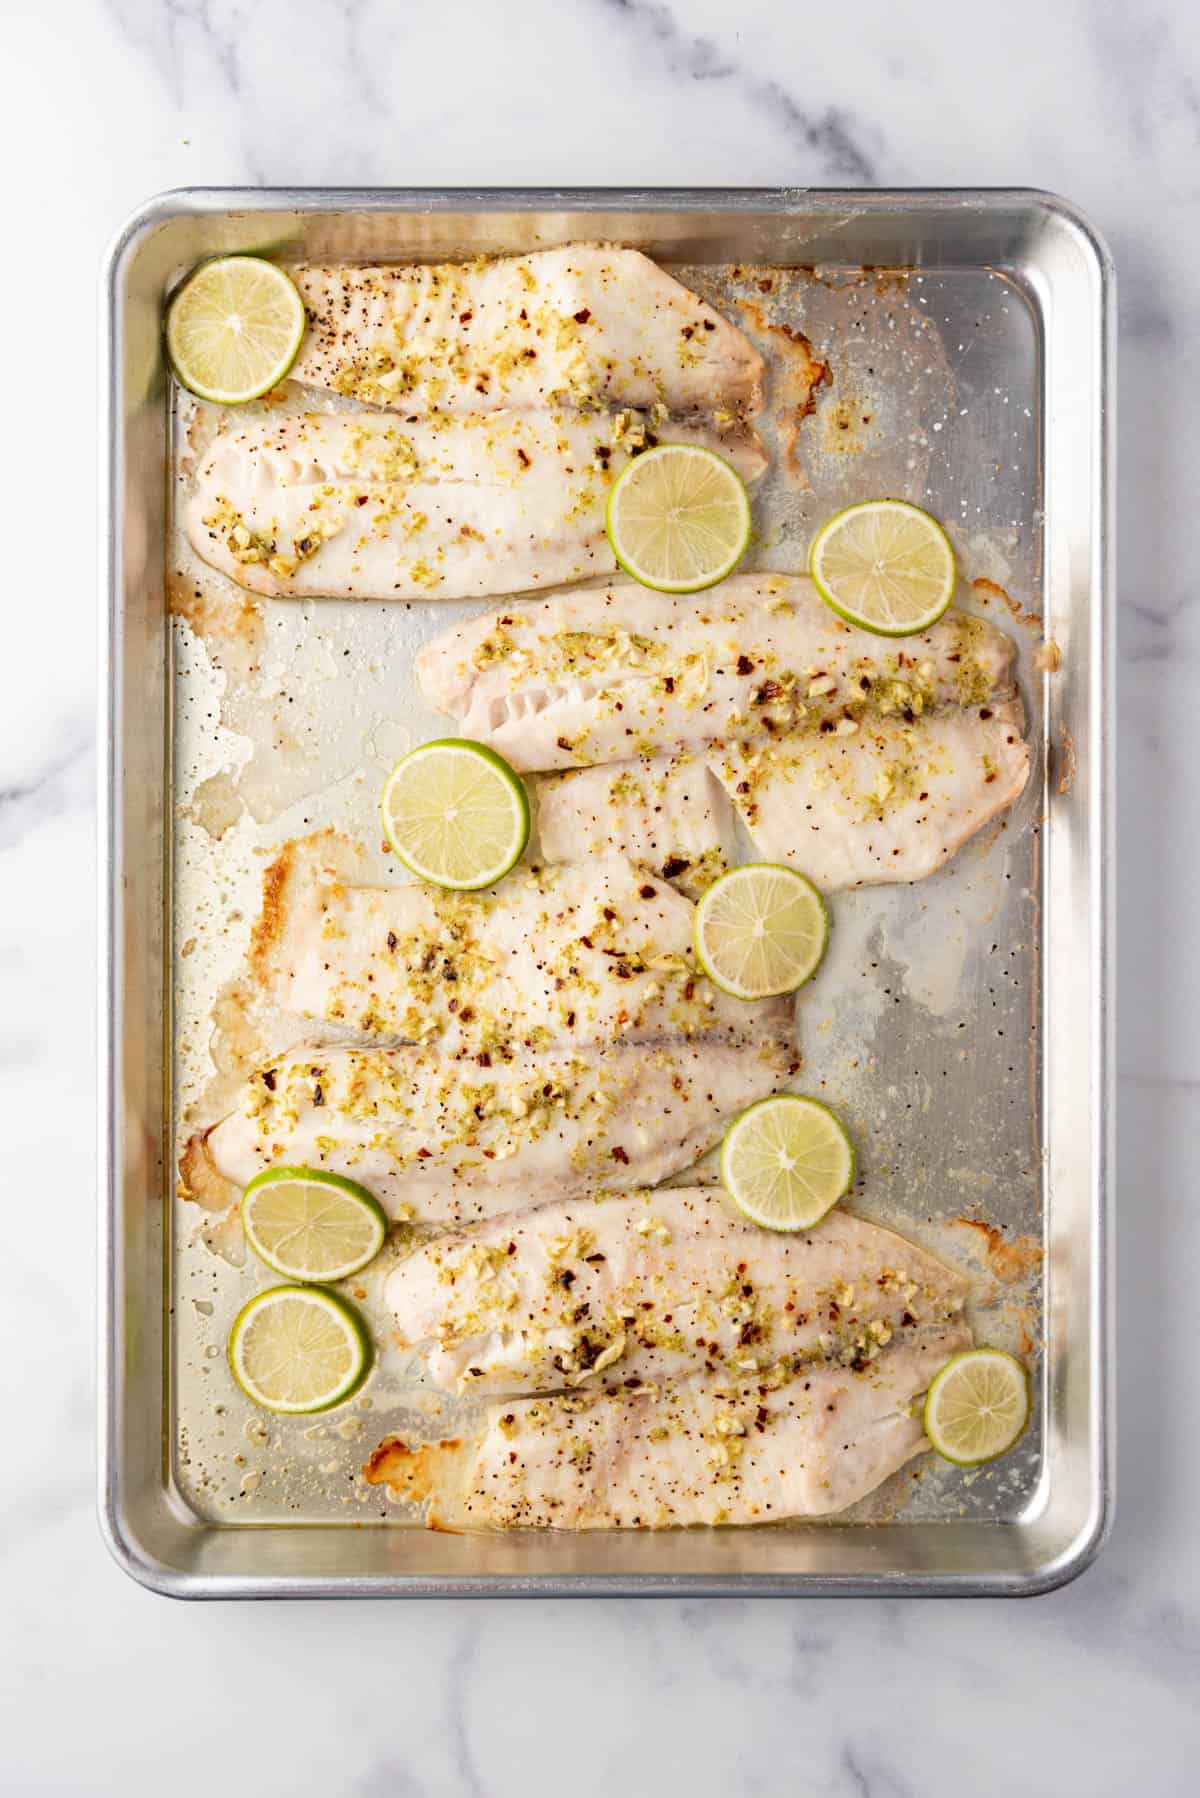 An overhead image of baked tilapia on a baking sheet with sliced limes on top.